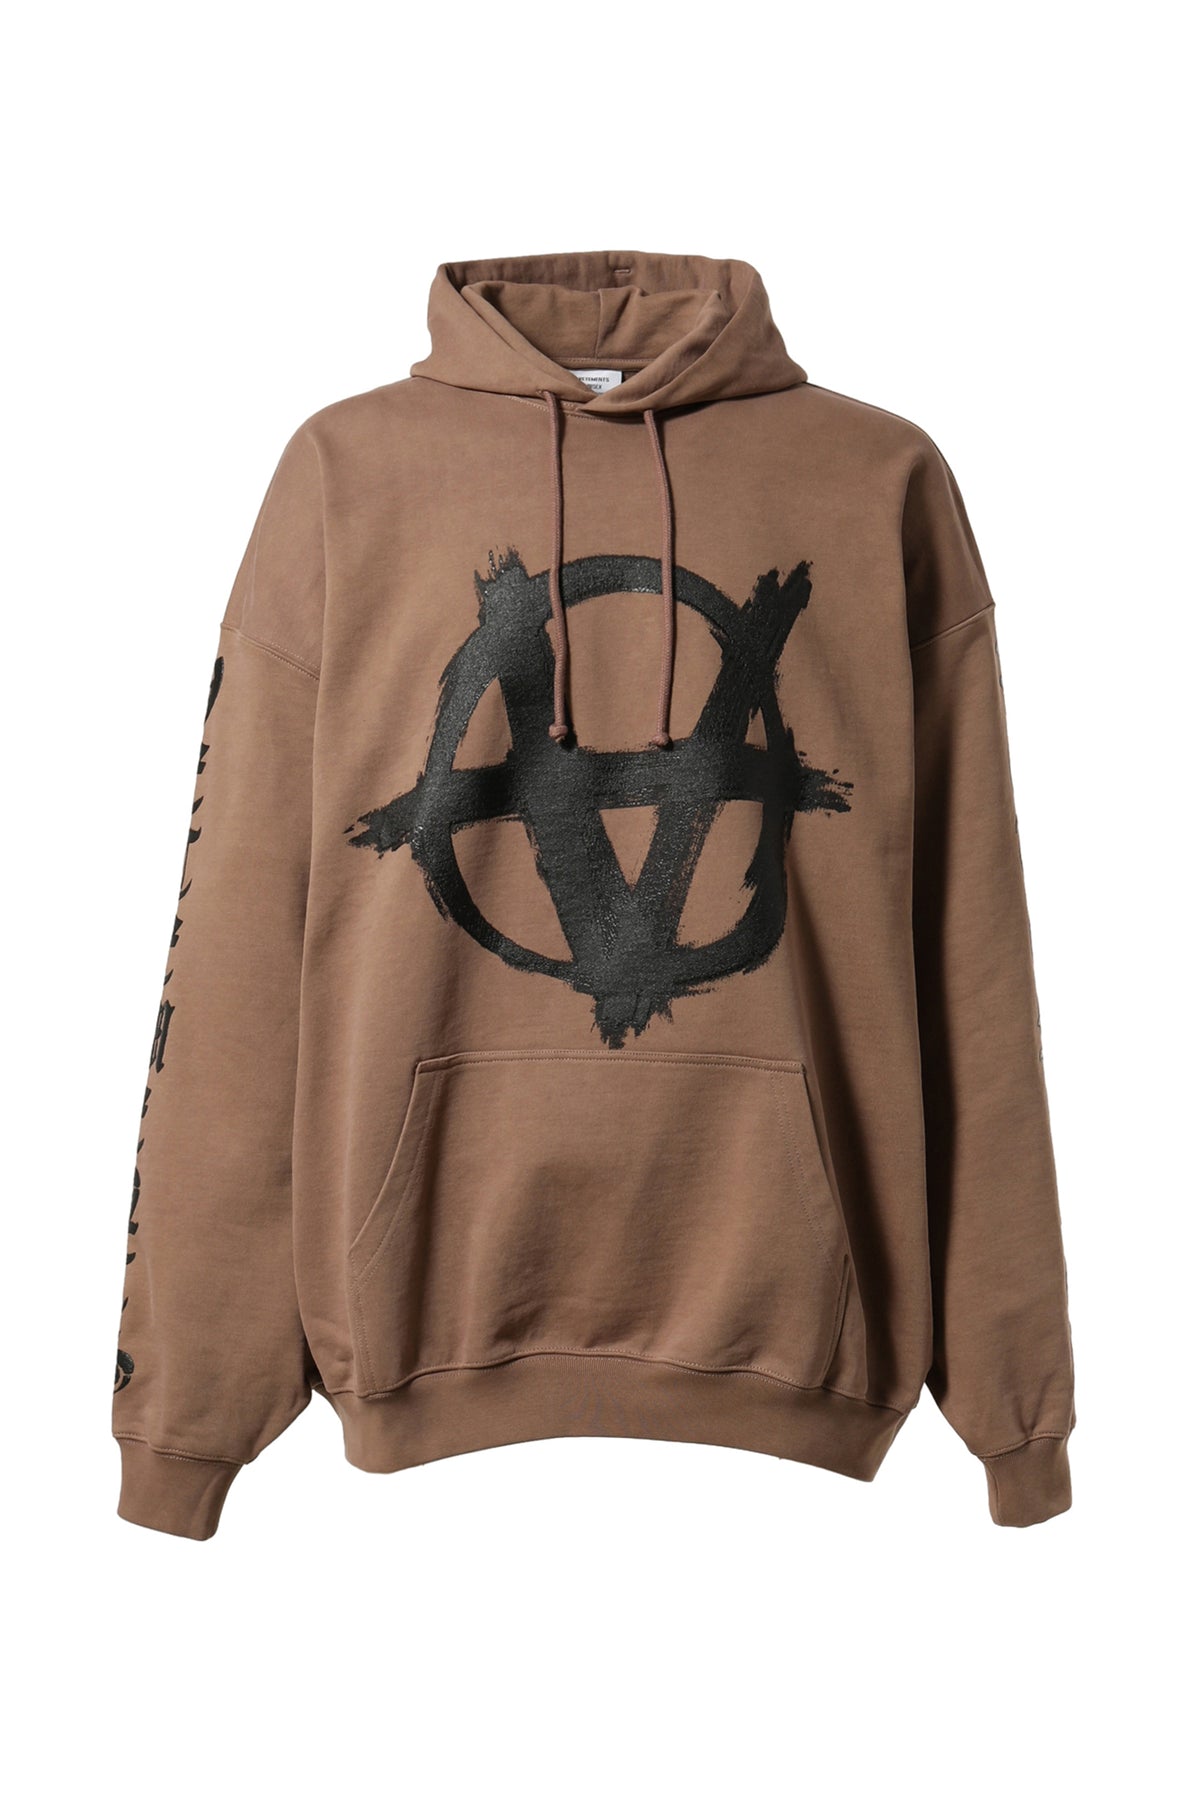 REVERSE ANARCHY HOODIE / WASHED EARTH BLK